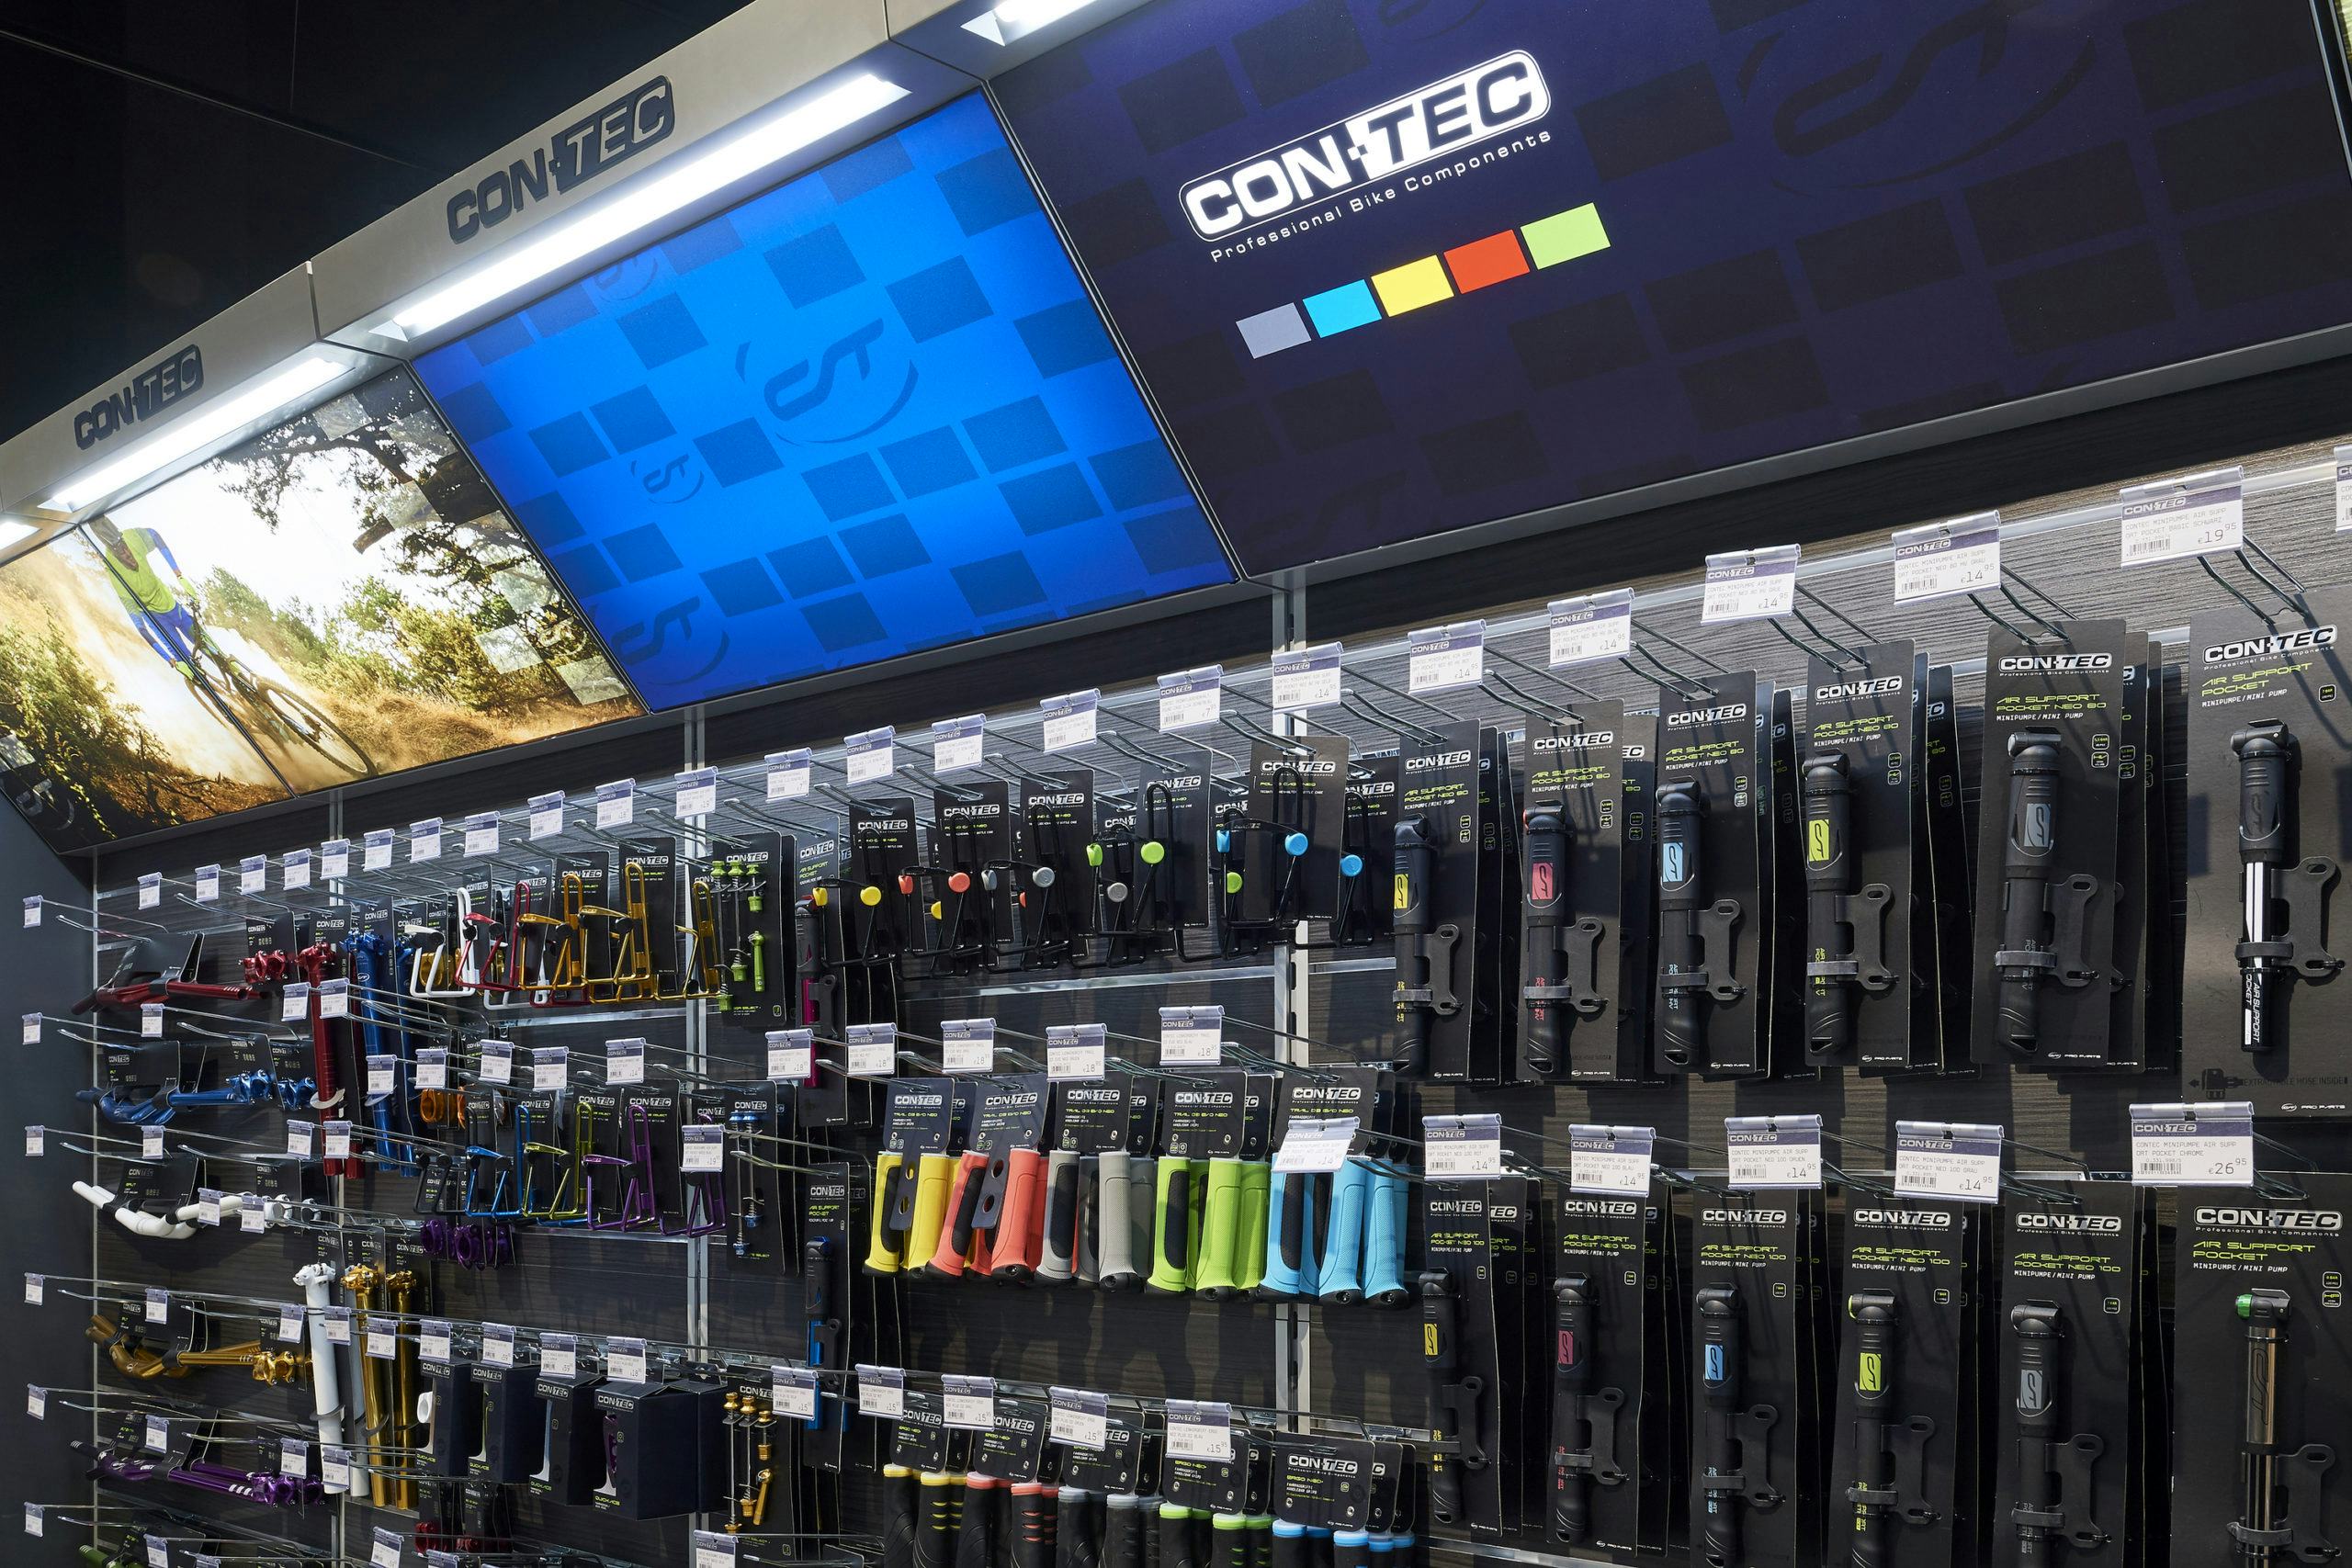 Contec focusses on allowing dealers and distributors to flourish